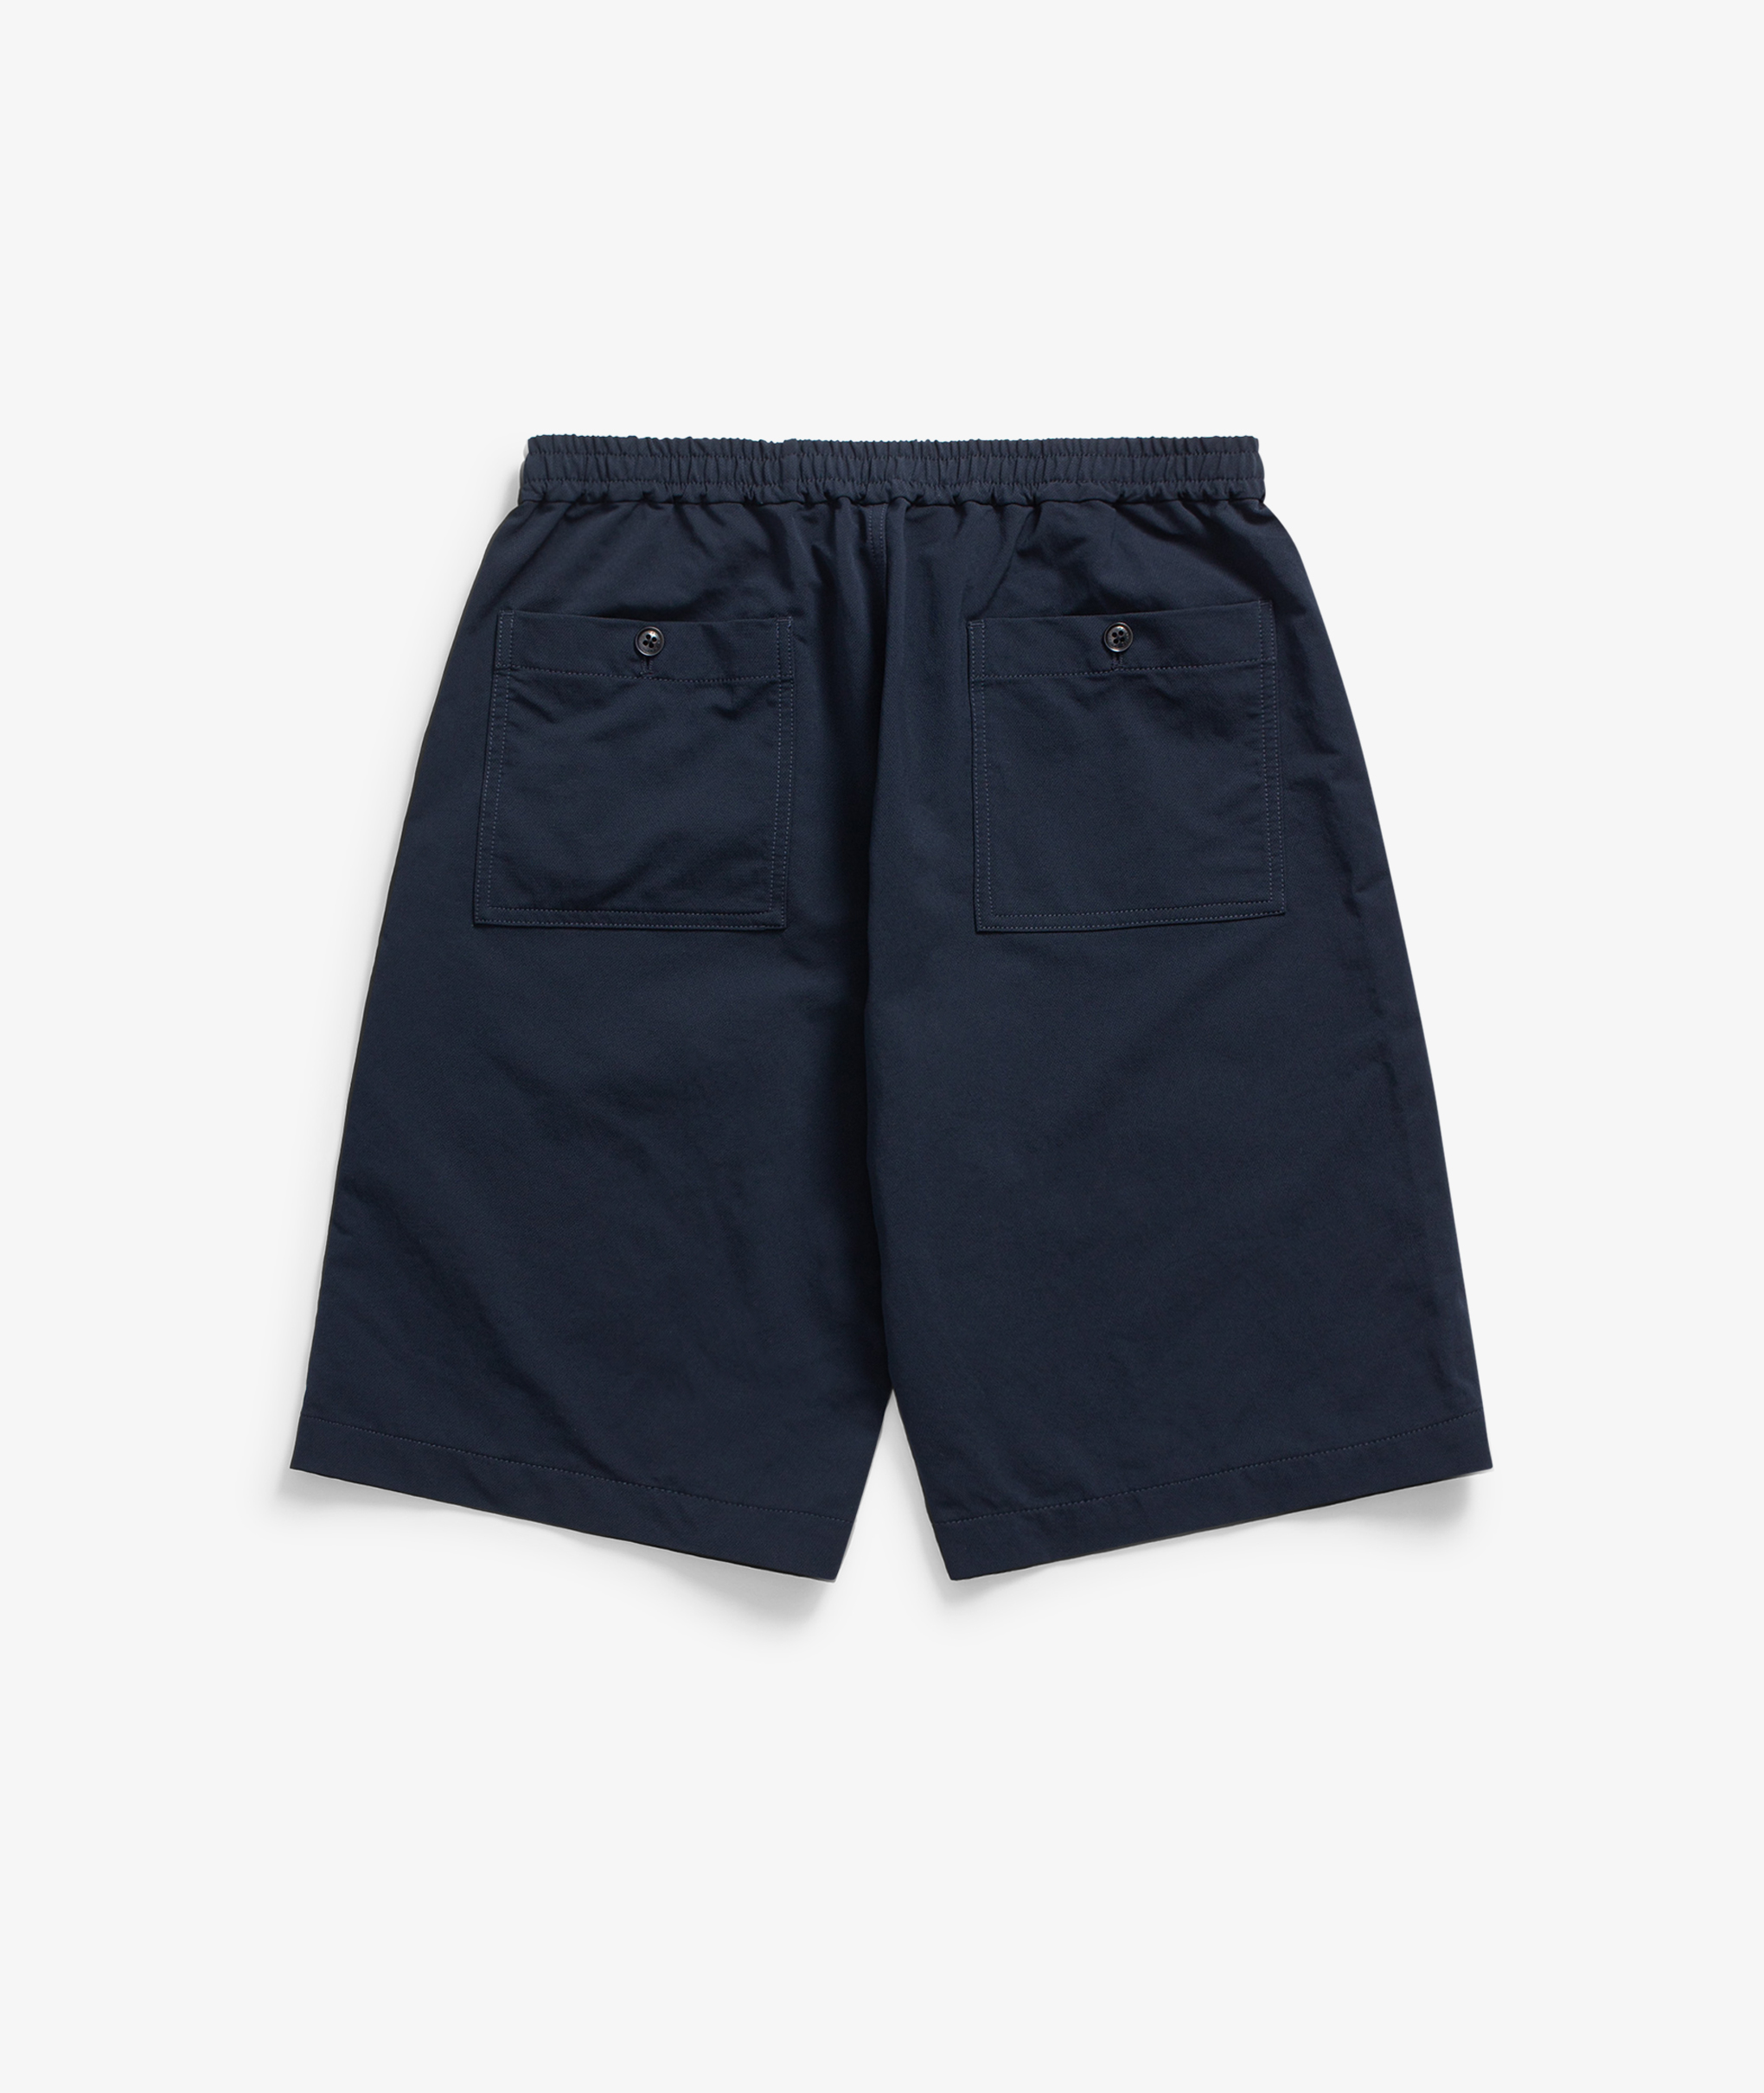 Norse Store | Shipping Worldwide - nanamica Alphadry Easy Shorts